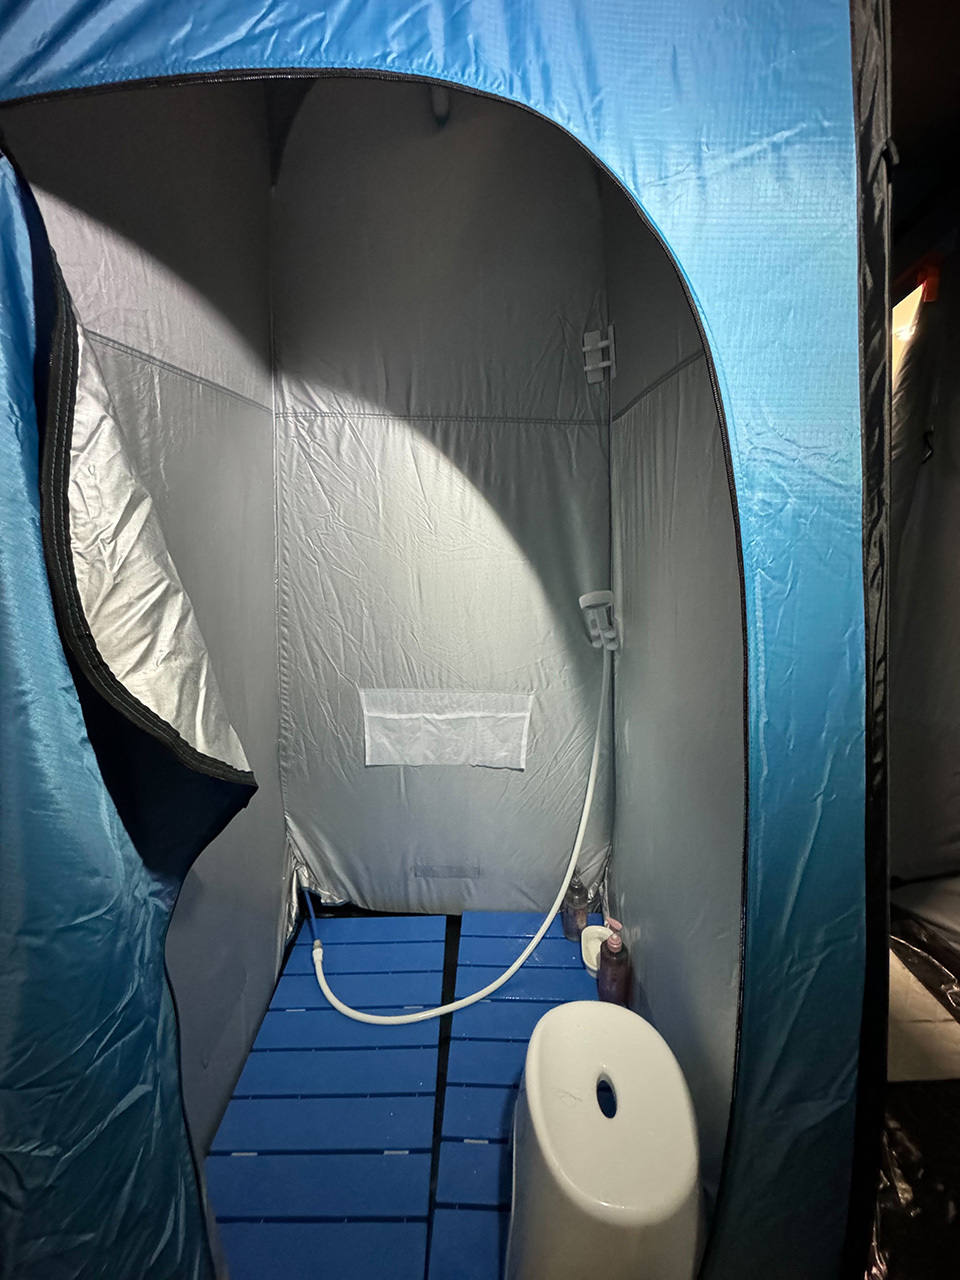 Interior of a portable, blue shower tent with a reflective lining, blue ground boards, and a white shower head.